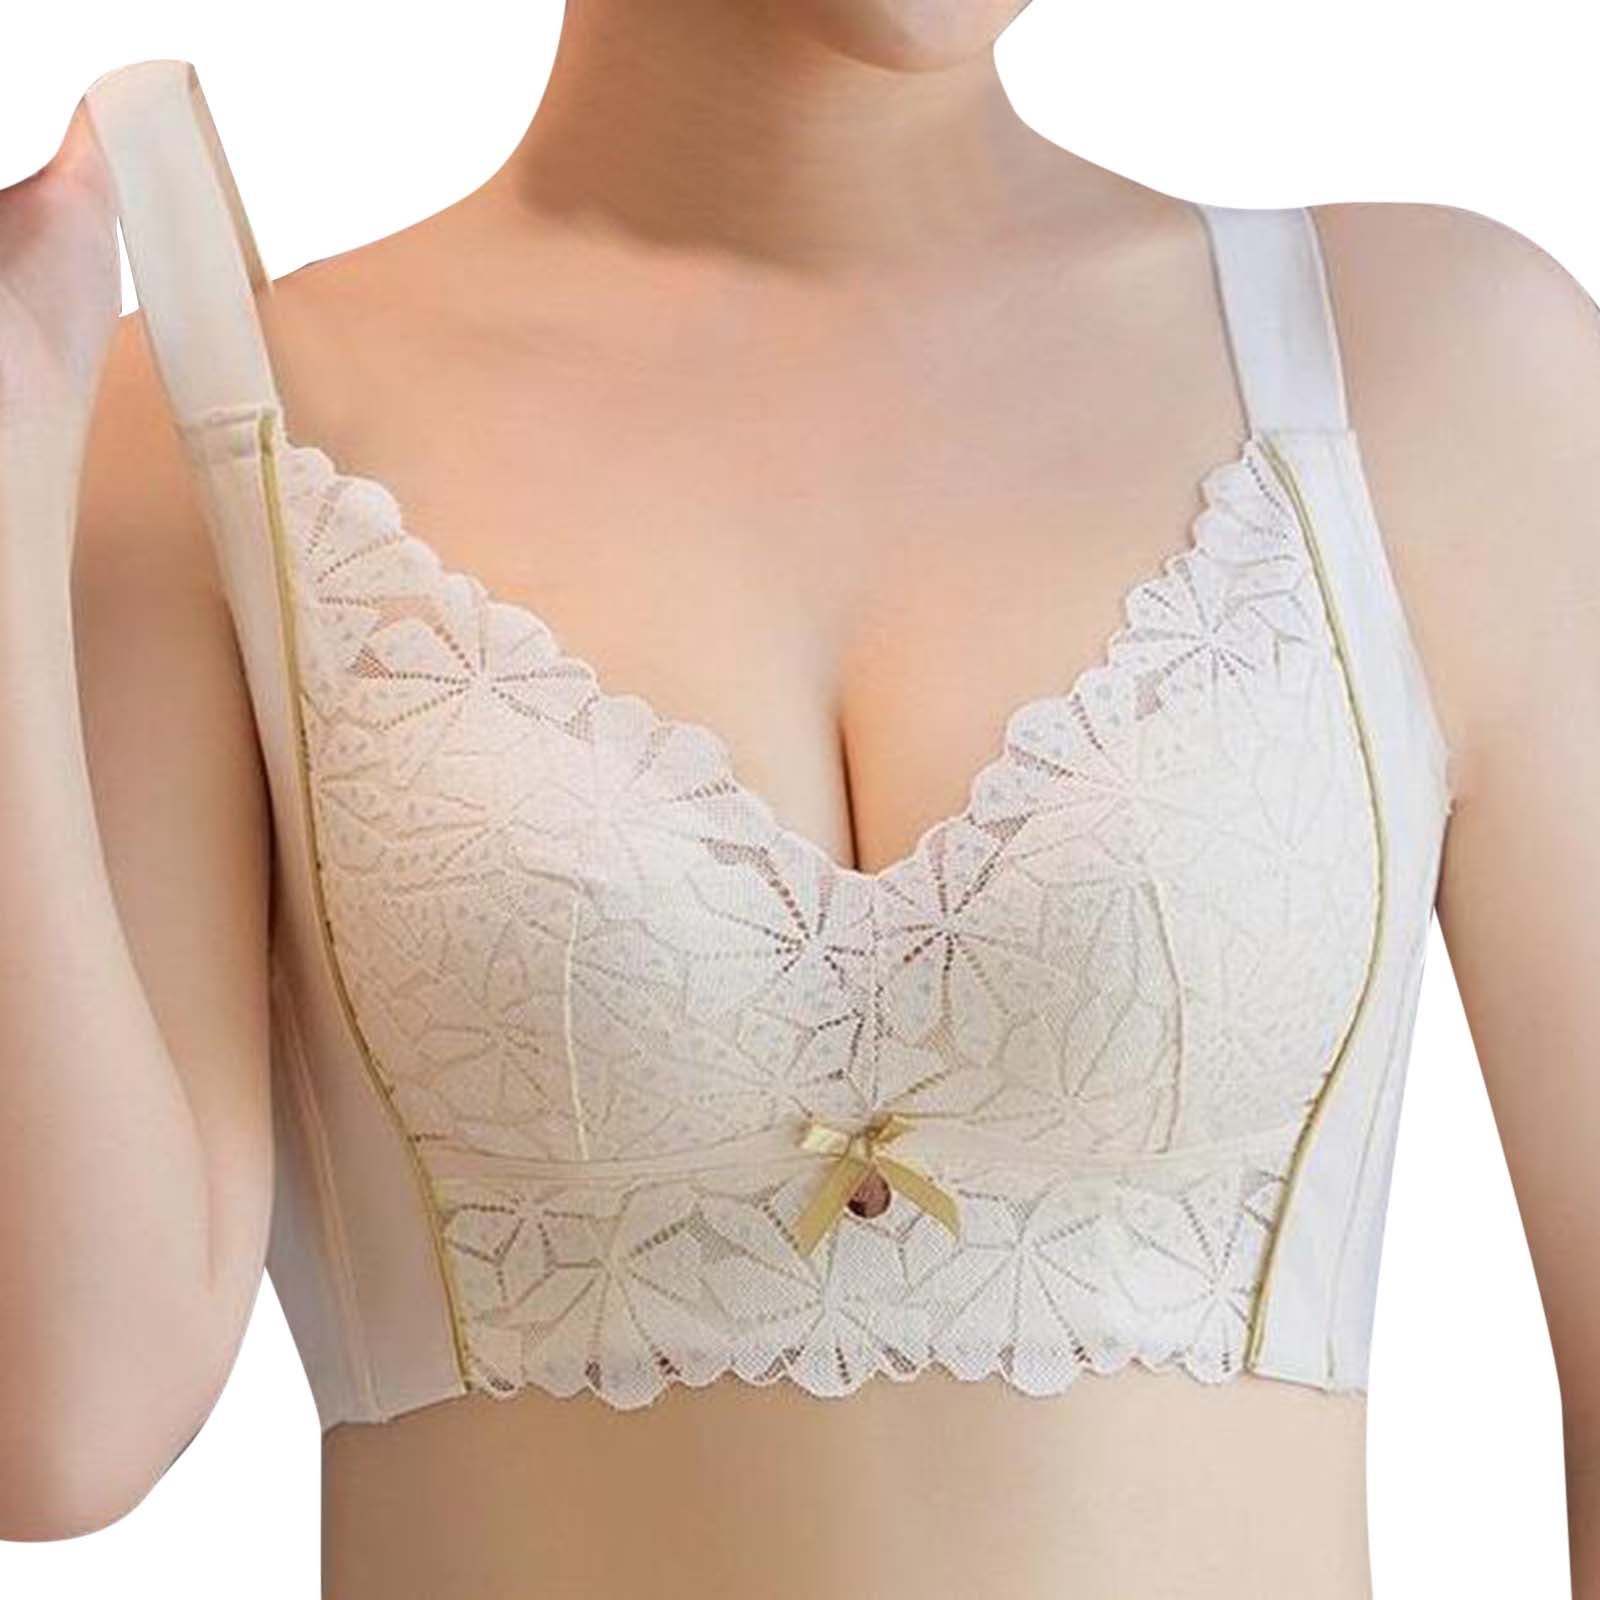 Lopecy-Sta Women's No Sponge No Steel Ring Bra Top Support Large Size Large  Cup Body Sculpting Gathering Collar Women's Underwear Womens Bras Sales  Clearance Bralettes for Women Yellow 